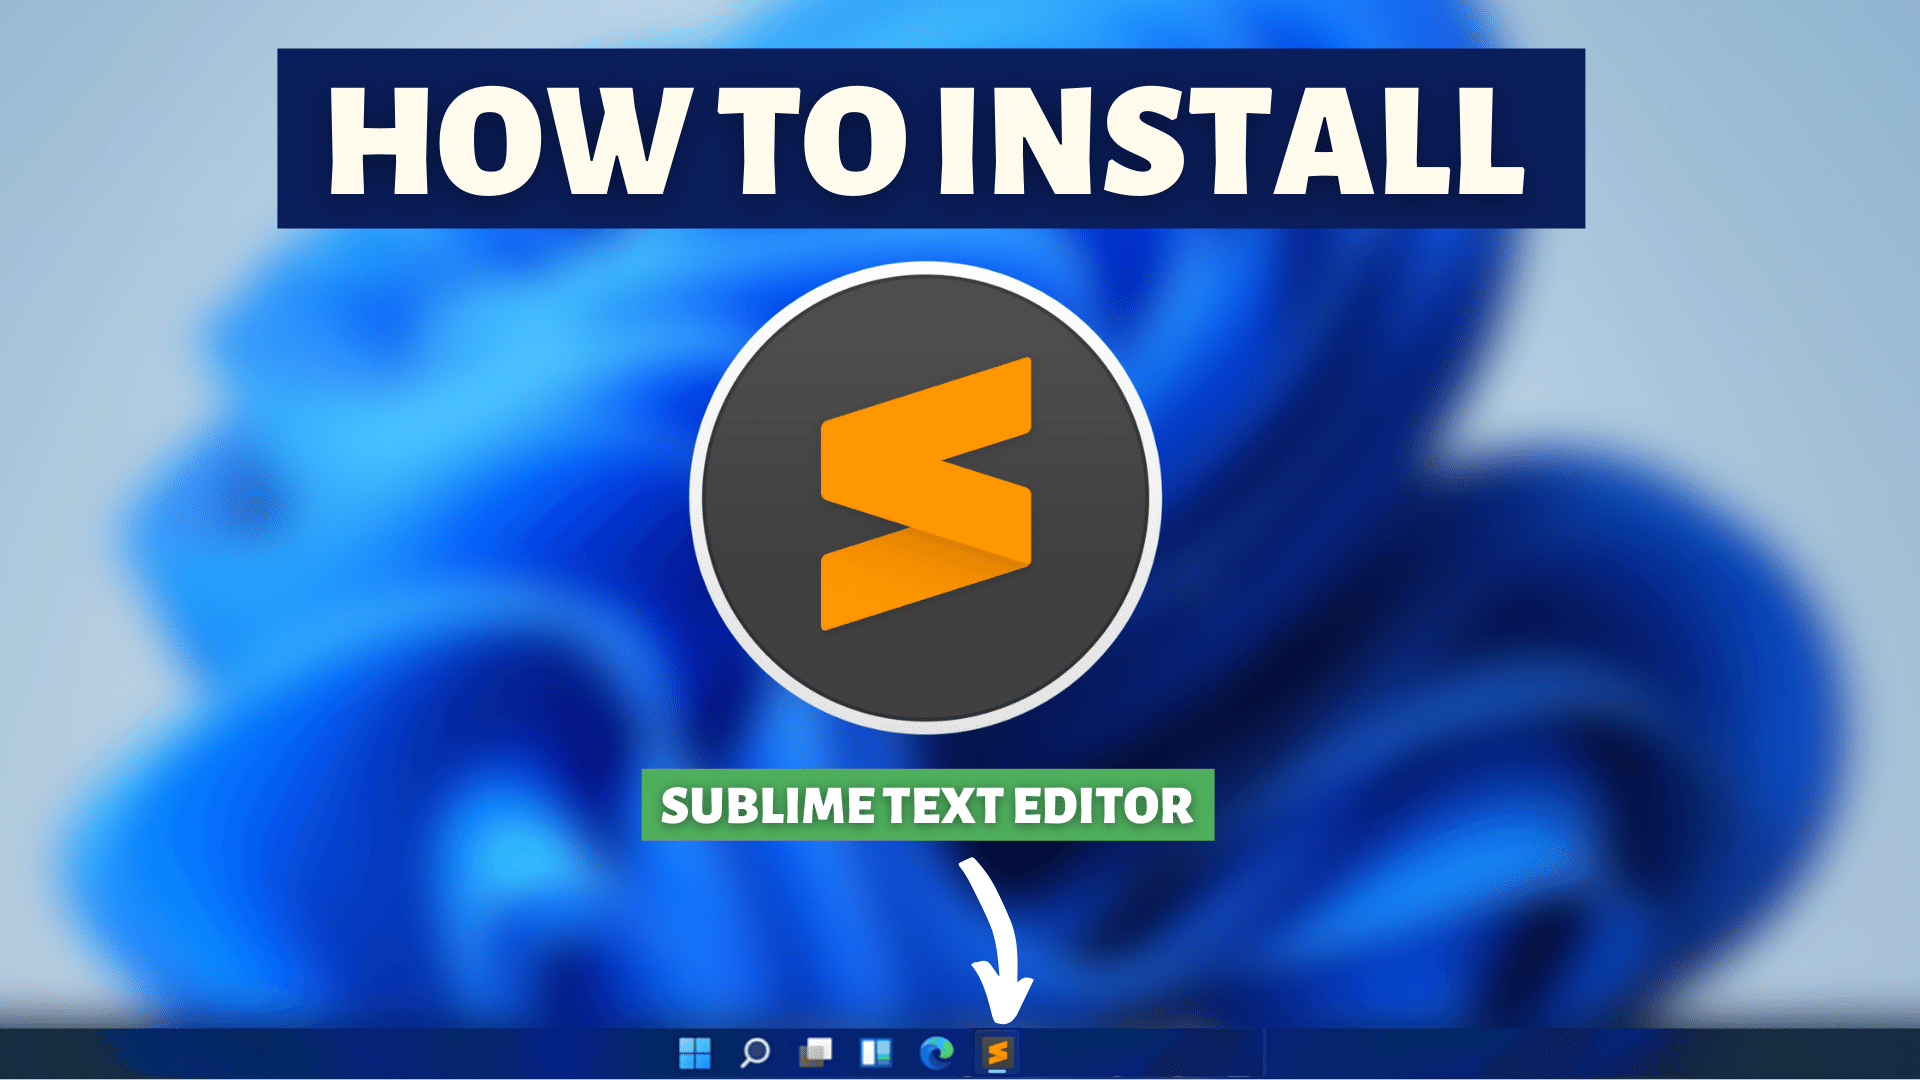 sublime text editor download windows 10